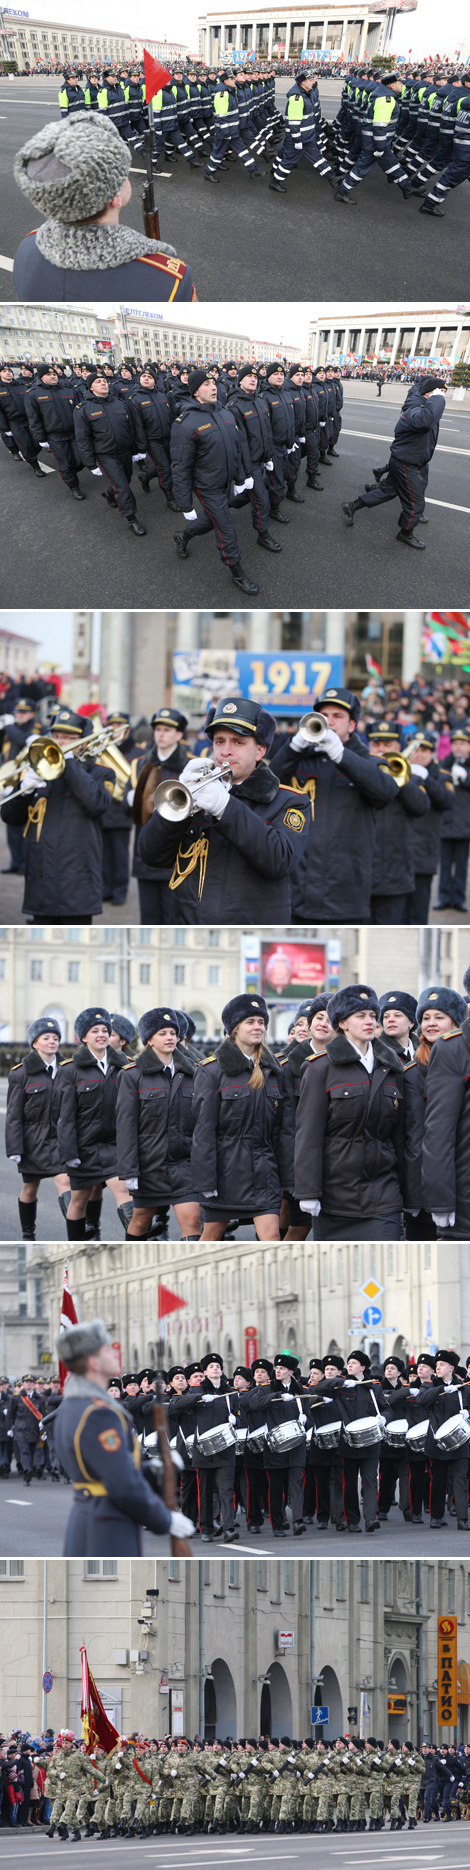 The Belarusian police 100th anniversary parade